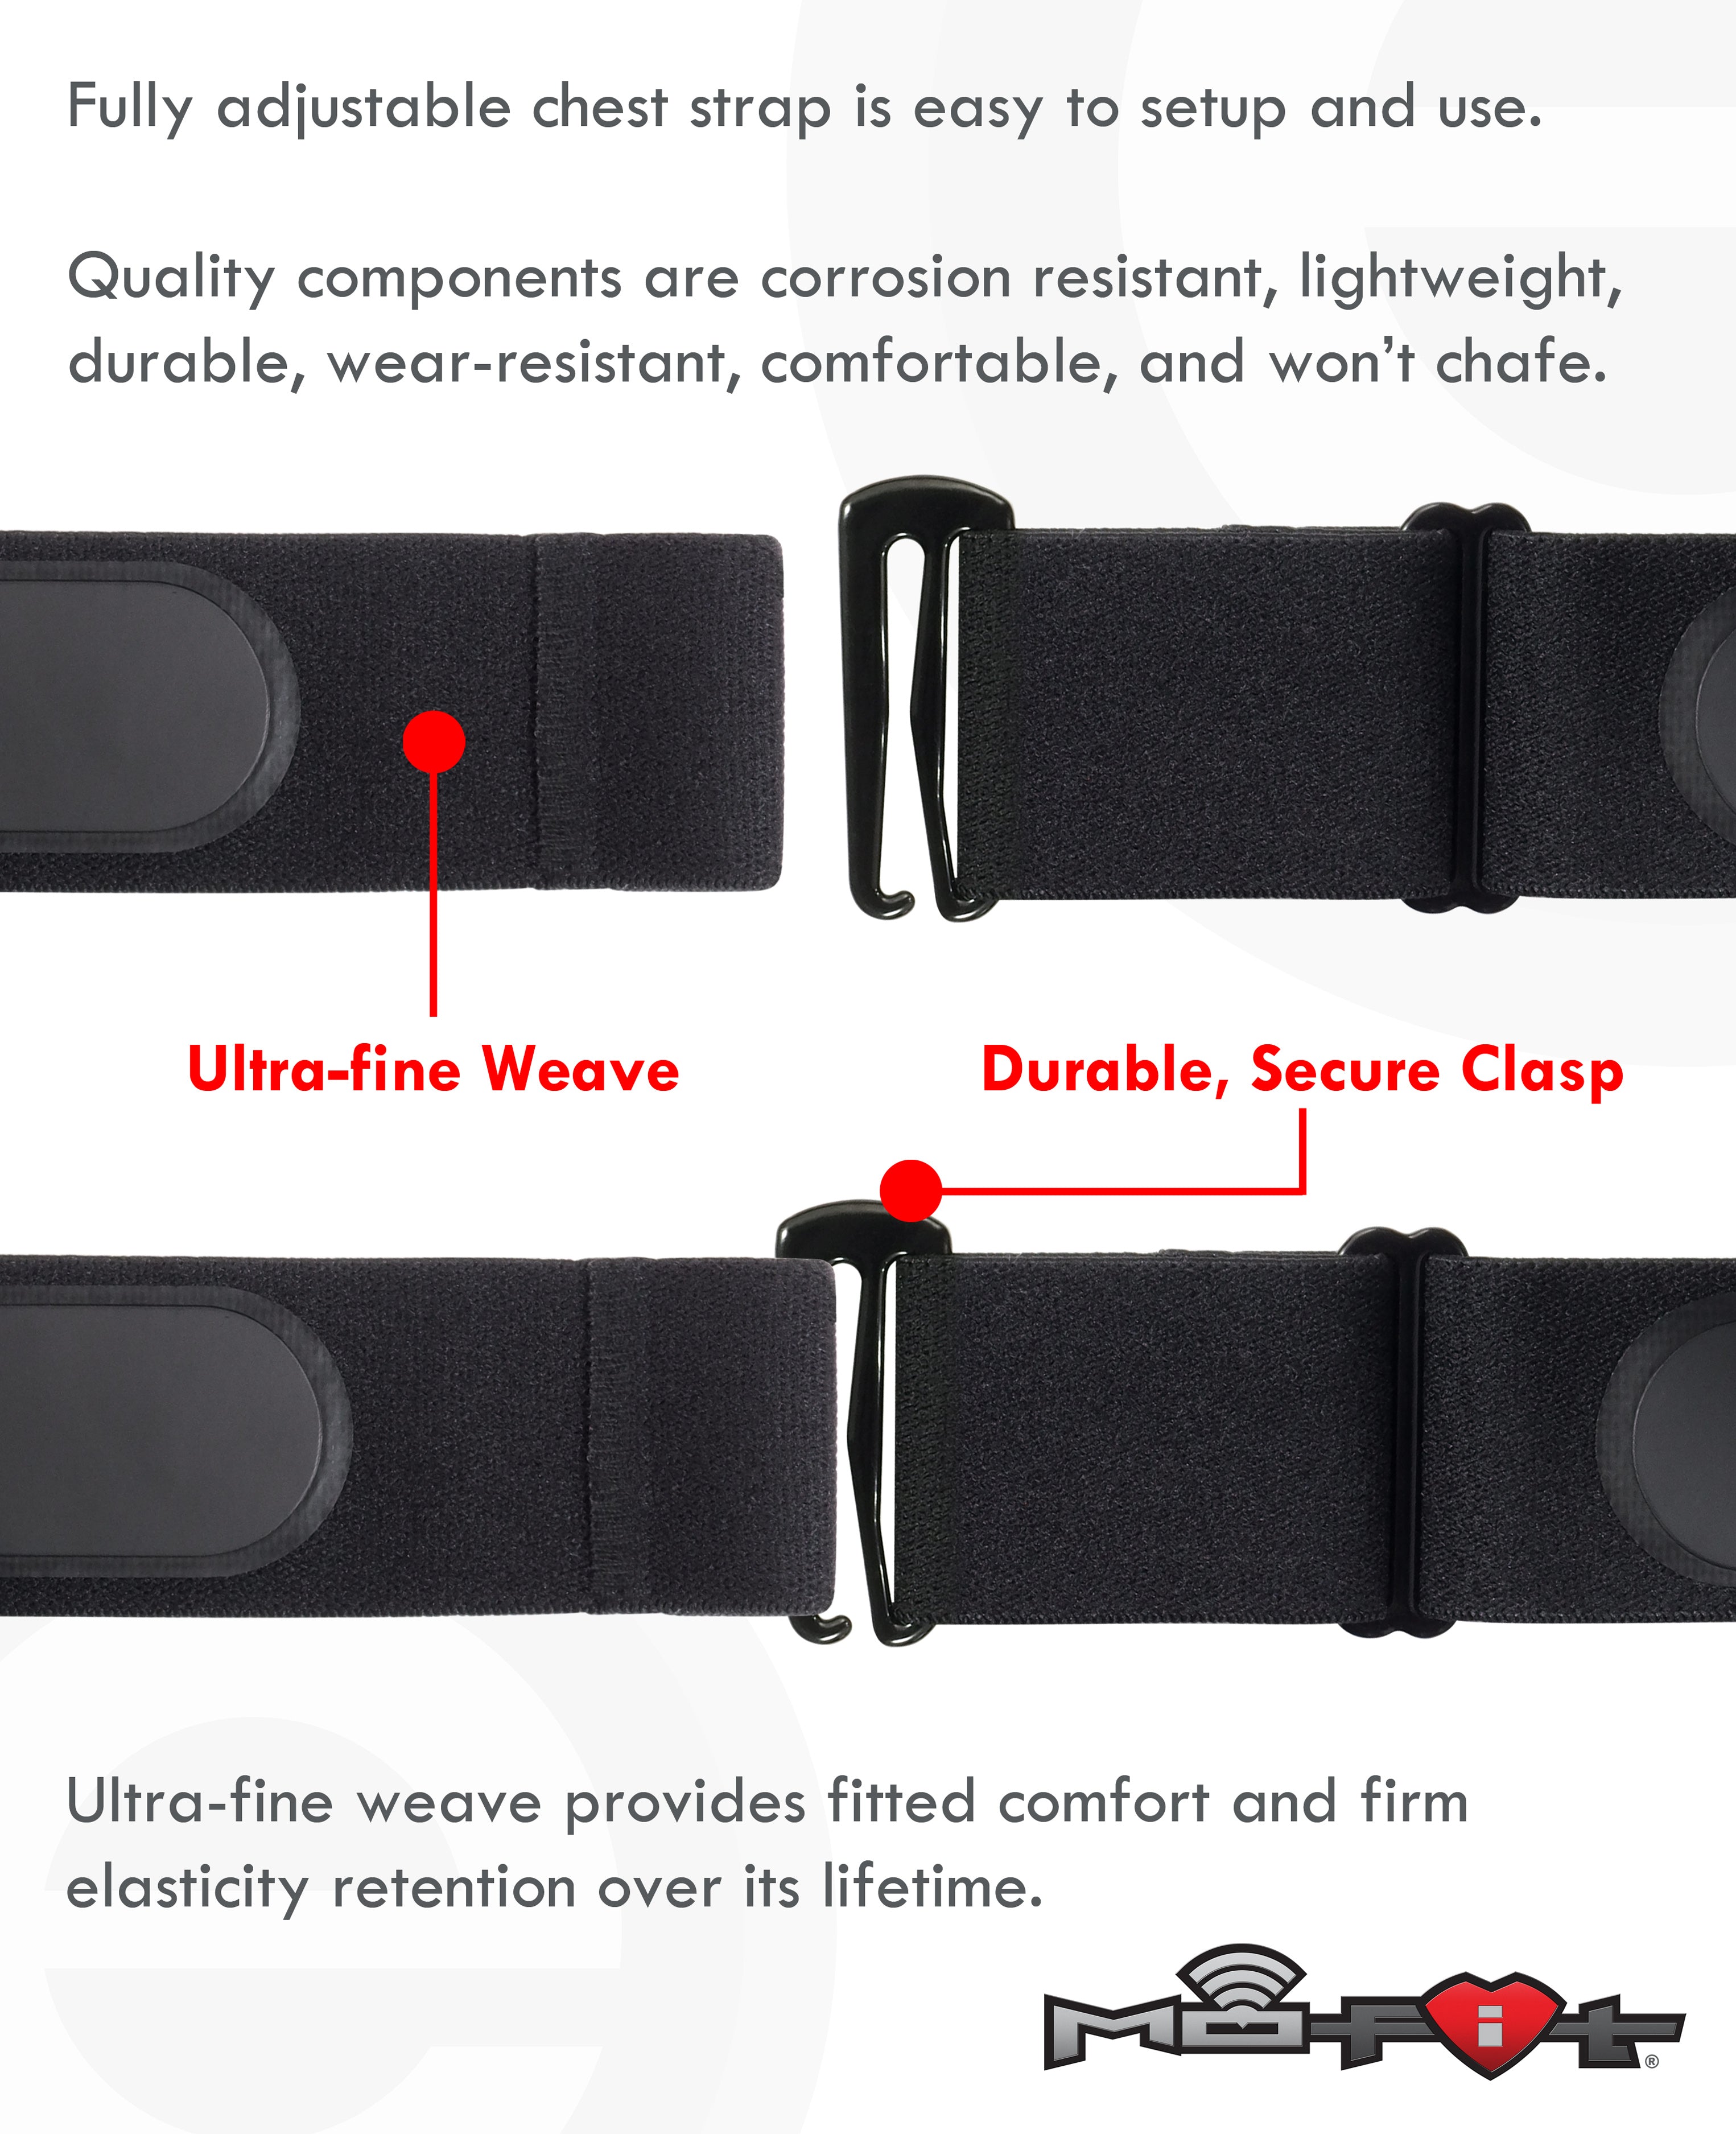 Heart Rate Monitor Chest Strap fits: Garmin HRM Dual, Wahoo TICKR,  Cardiosport